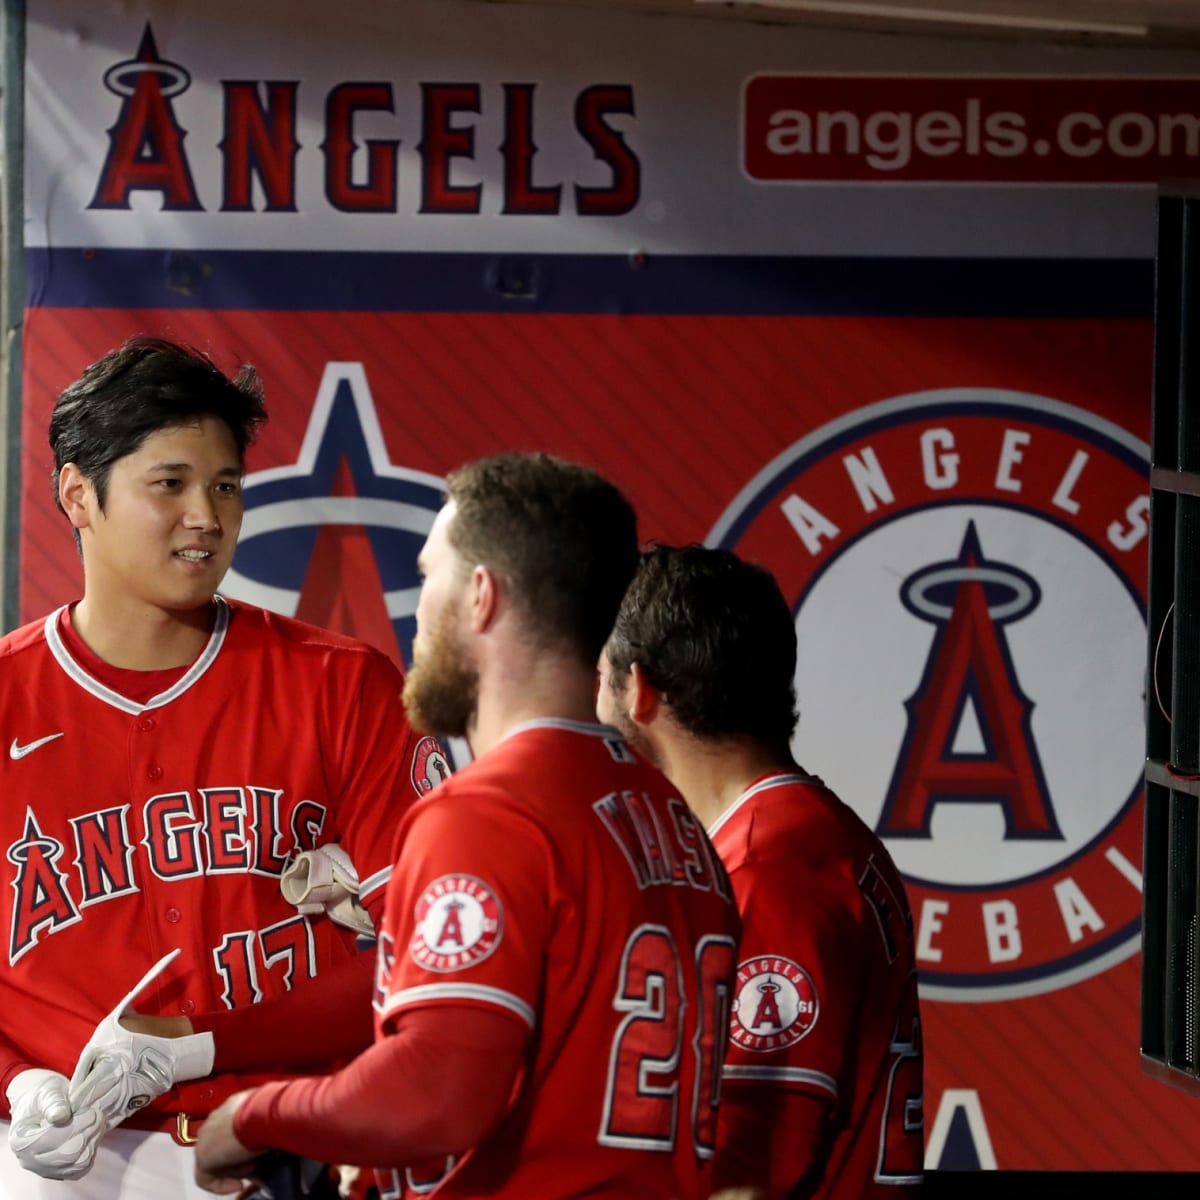 Jared Walsh hits for cycle, Mike Trout hits 2 HRs as Angels rout